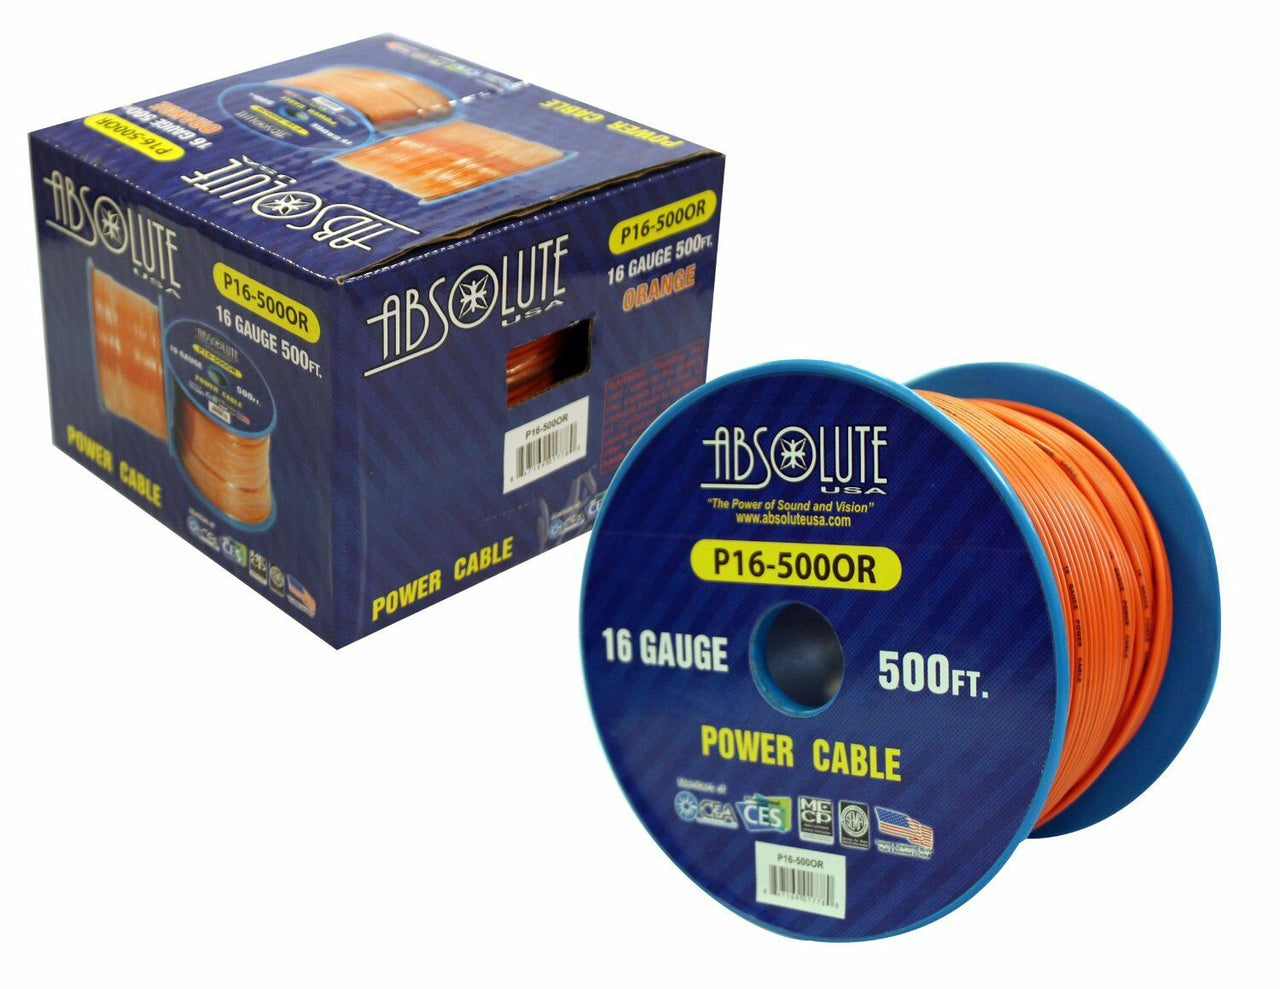 Absolute USA P16-500OR 16 Gauge 500-Feet Spool Primary Power Wire Cable (Orange)